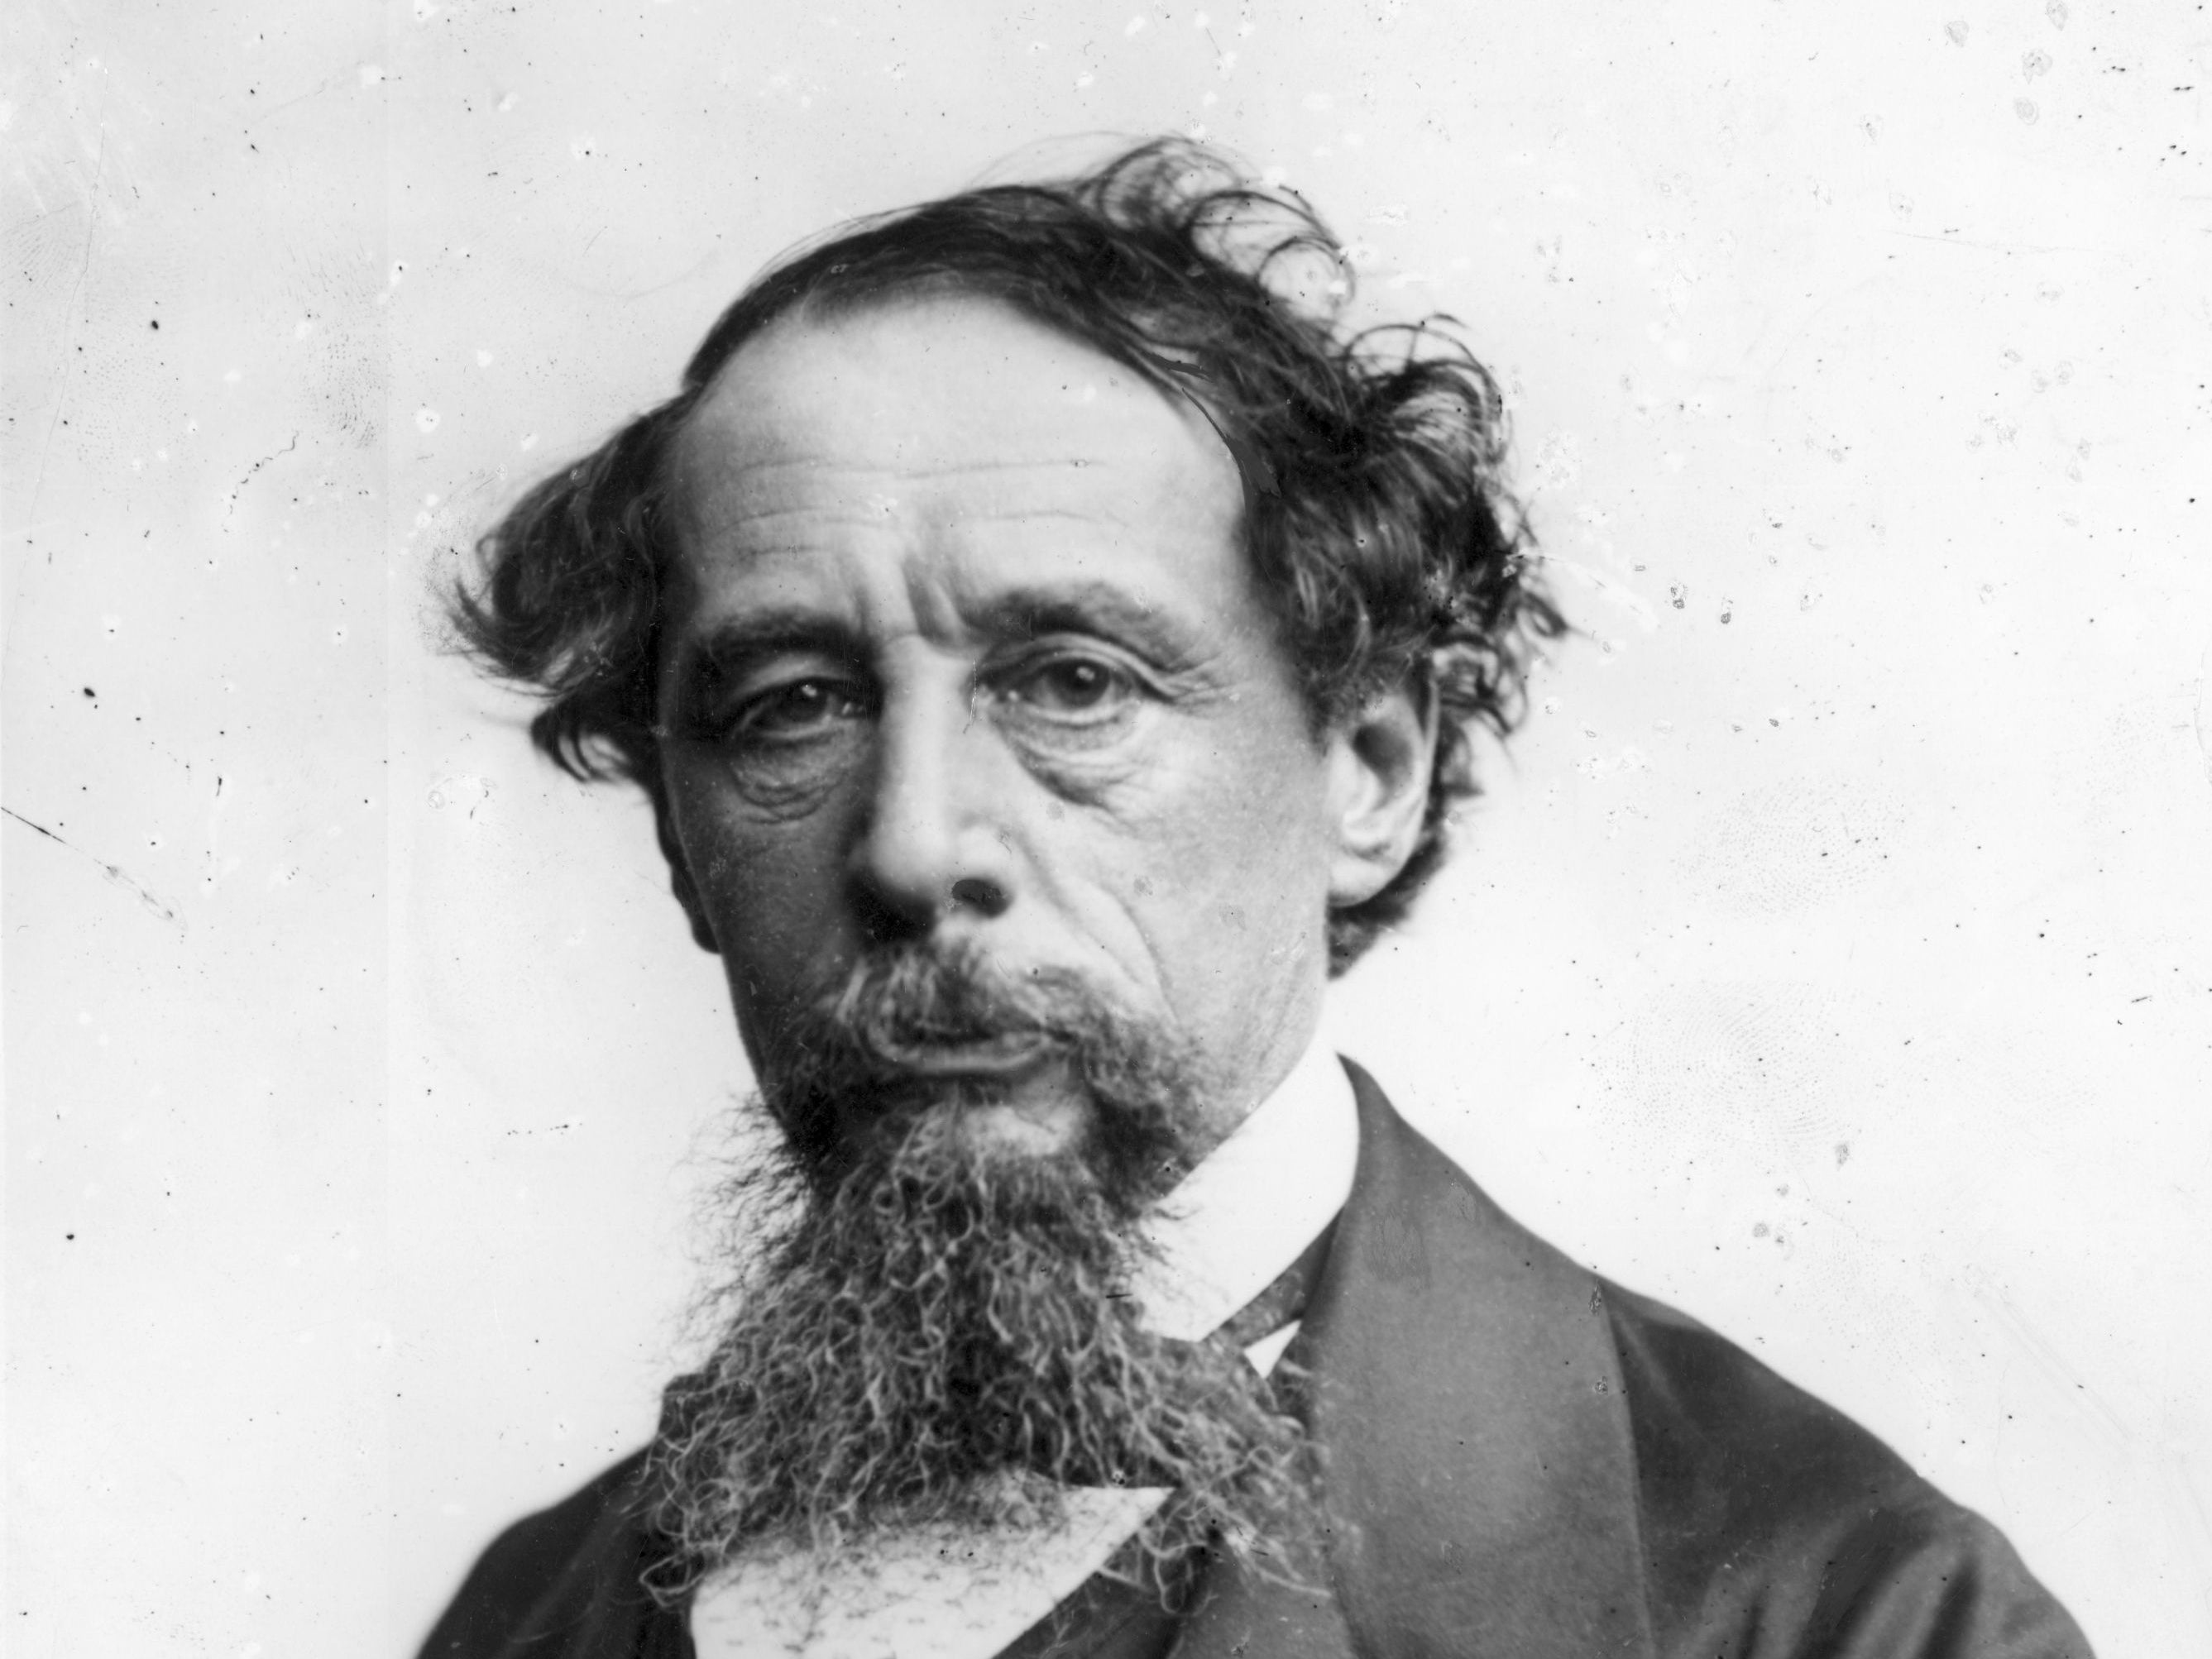 Dickens berates the cruelty of the age